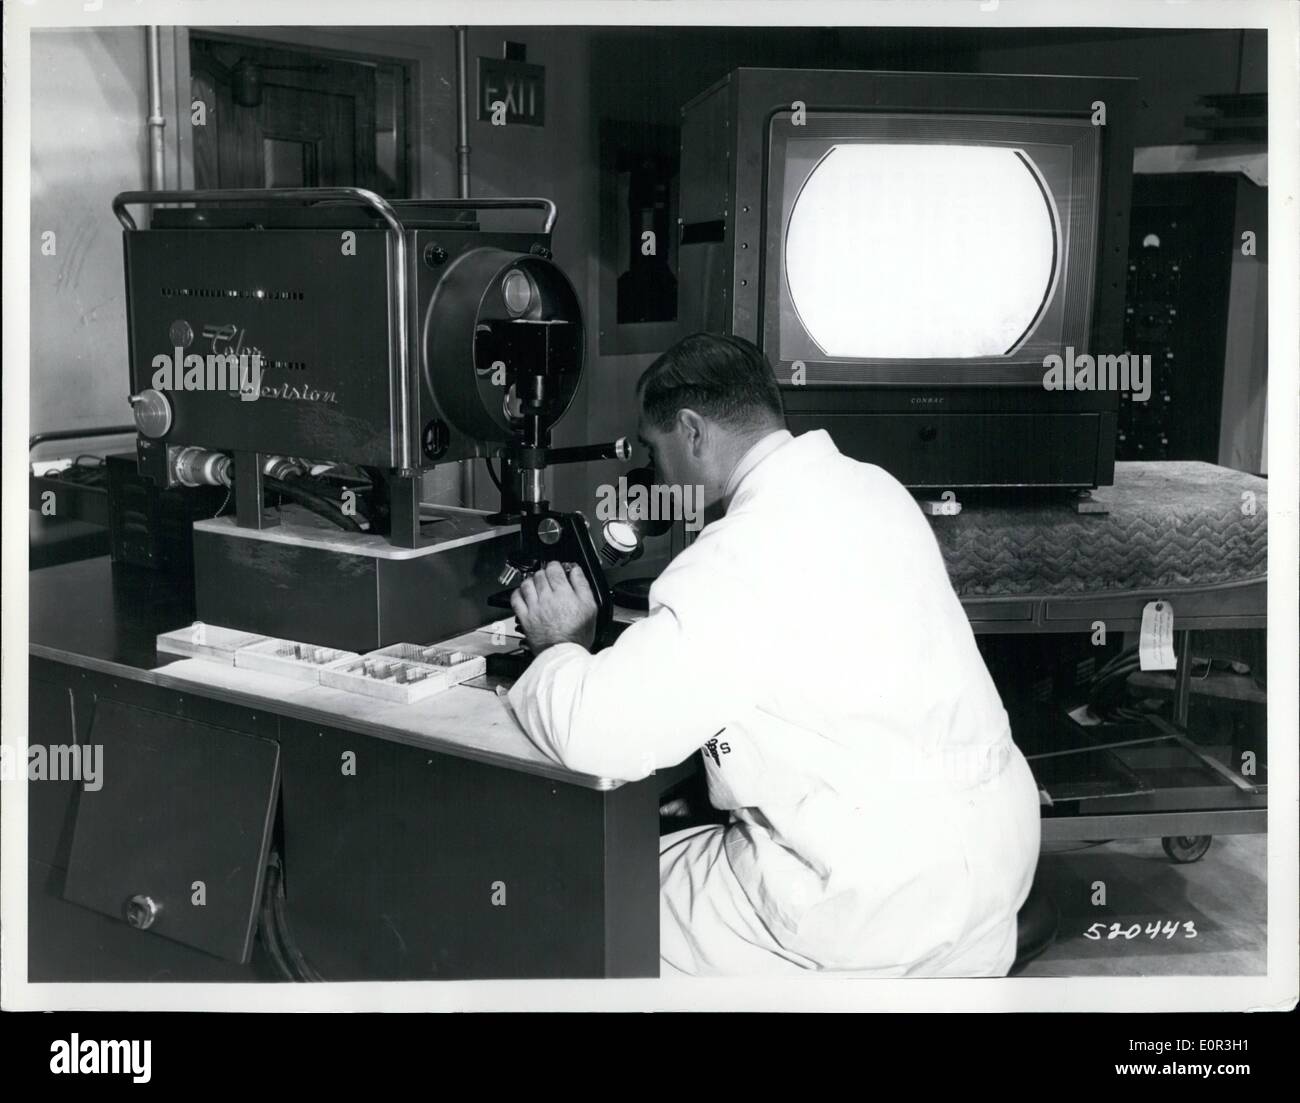 Nov. 11, 1957 - Army Medical Center's TV-Microscope; The US Army announced the development of a color TV microscope camera now in use at the Walter Reed Army Medical Center which enables the surgeon and the pathologist to examine together tissue removed from a patient during an operation. The tissue is sent from the operating room by pneumatic tube to the Pathology Laboratory, where a slide is prepared and inserted in the microscope. Audio connection permits discussion while surgeon and pathologist examine the specimen Stock Photo